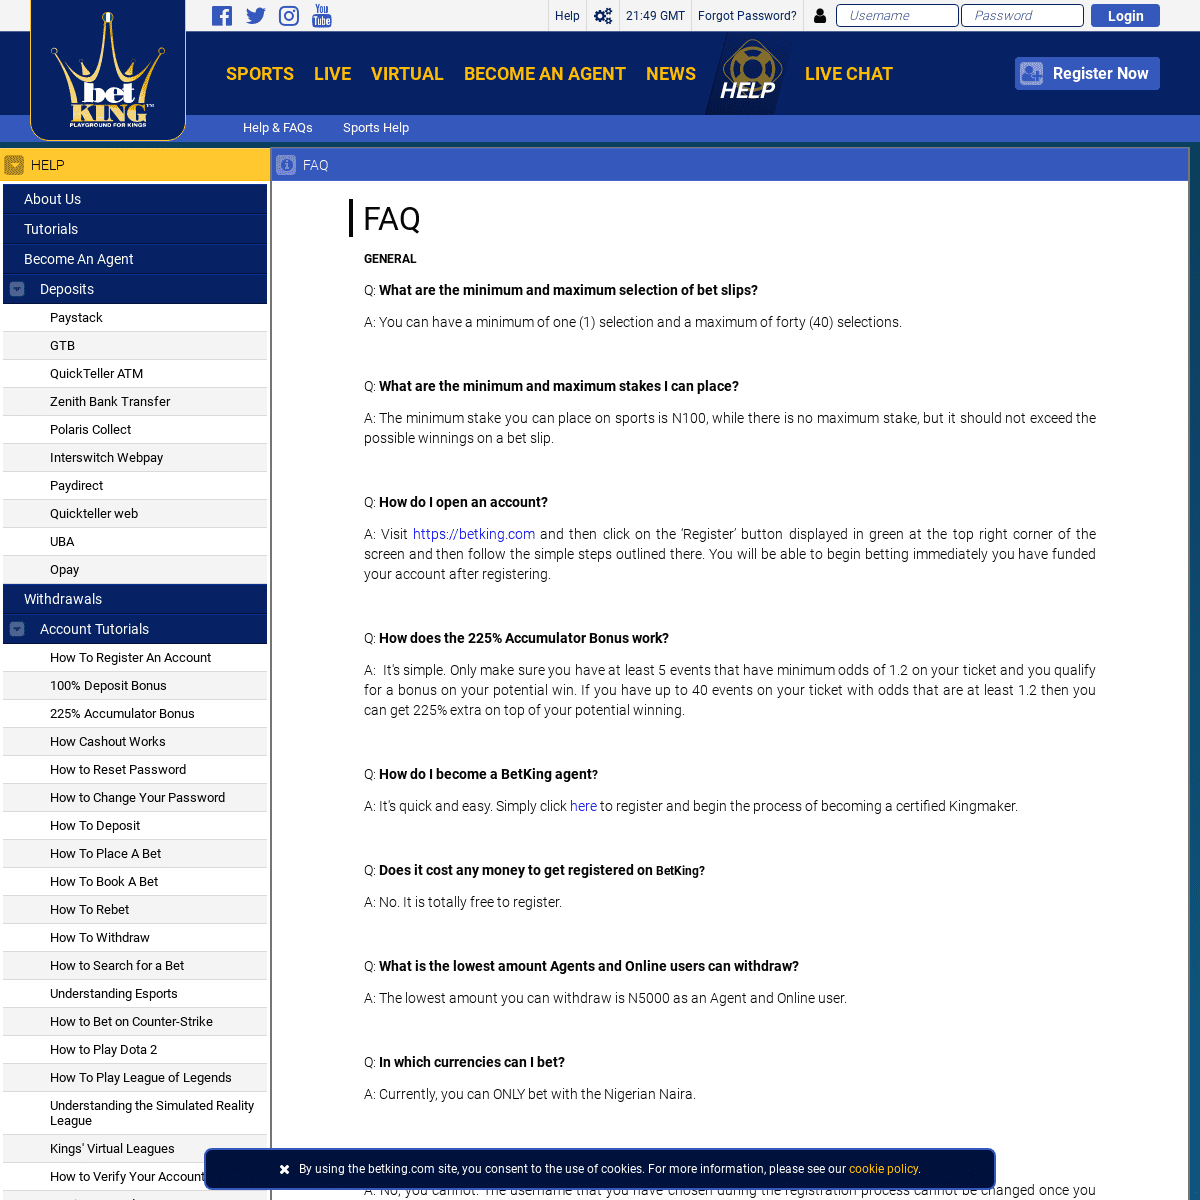 A complete backup of https://www.betking.com/help/general-help/faq/